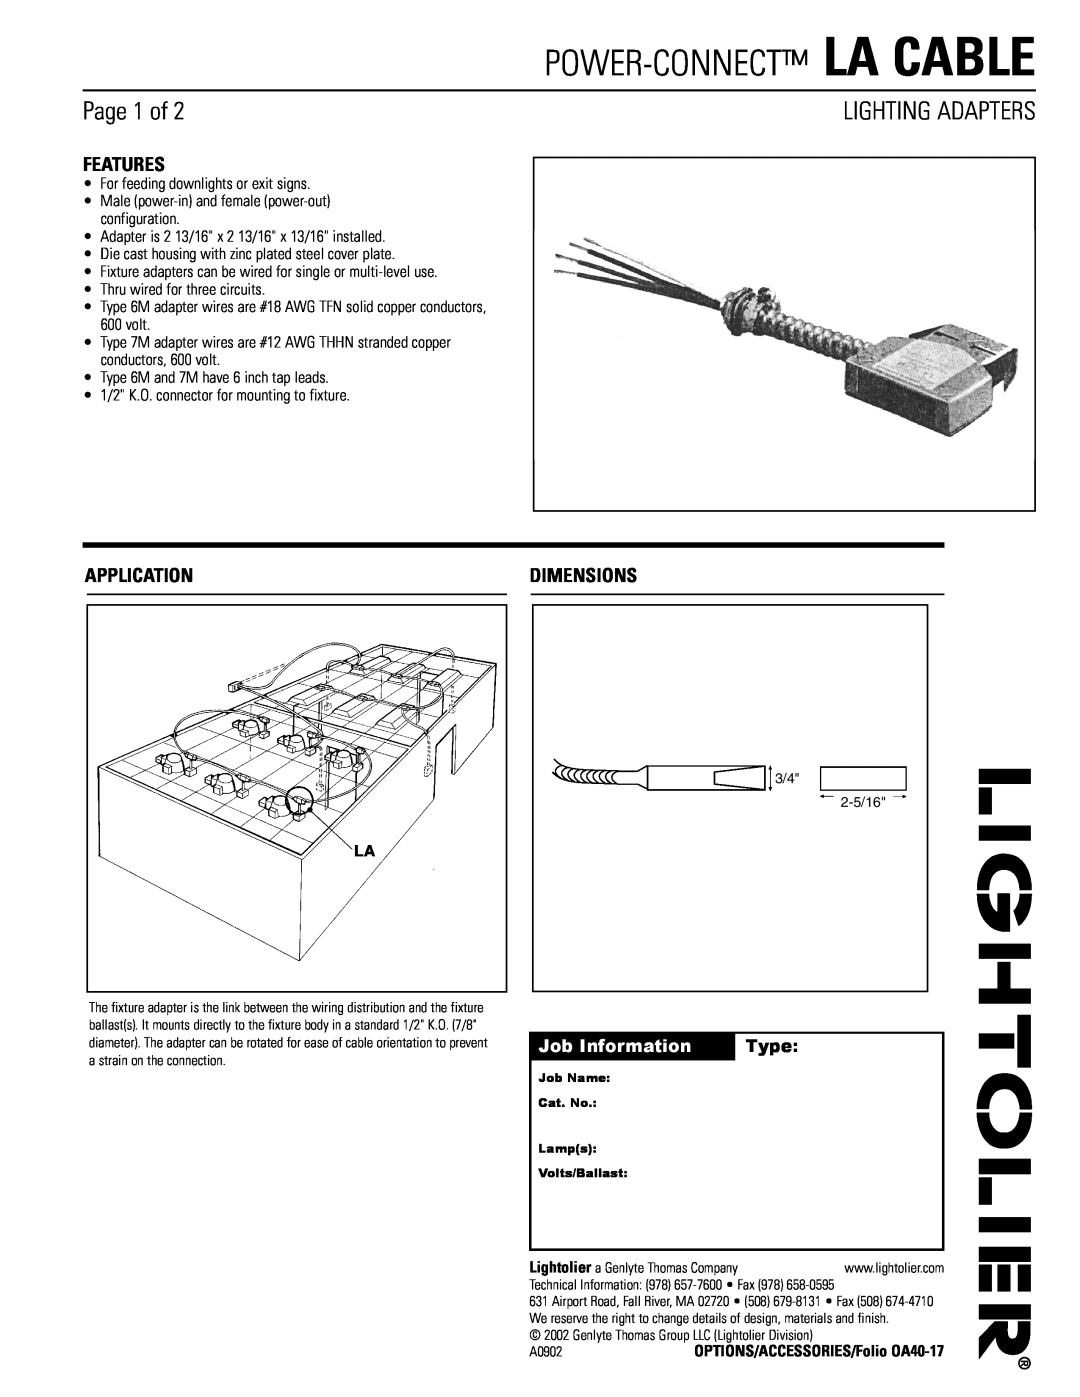 Lightolier dimensions Power-Connect La Cable, Page 1 of, Features, Application, Dimensions, Lighting Adapters, Type 